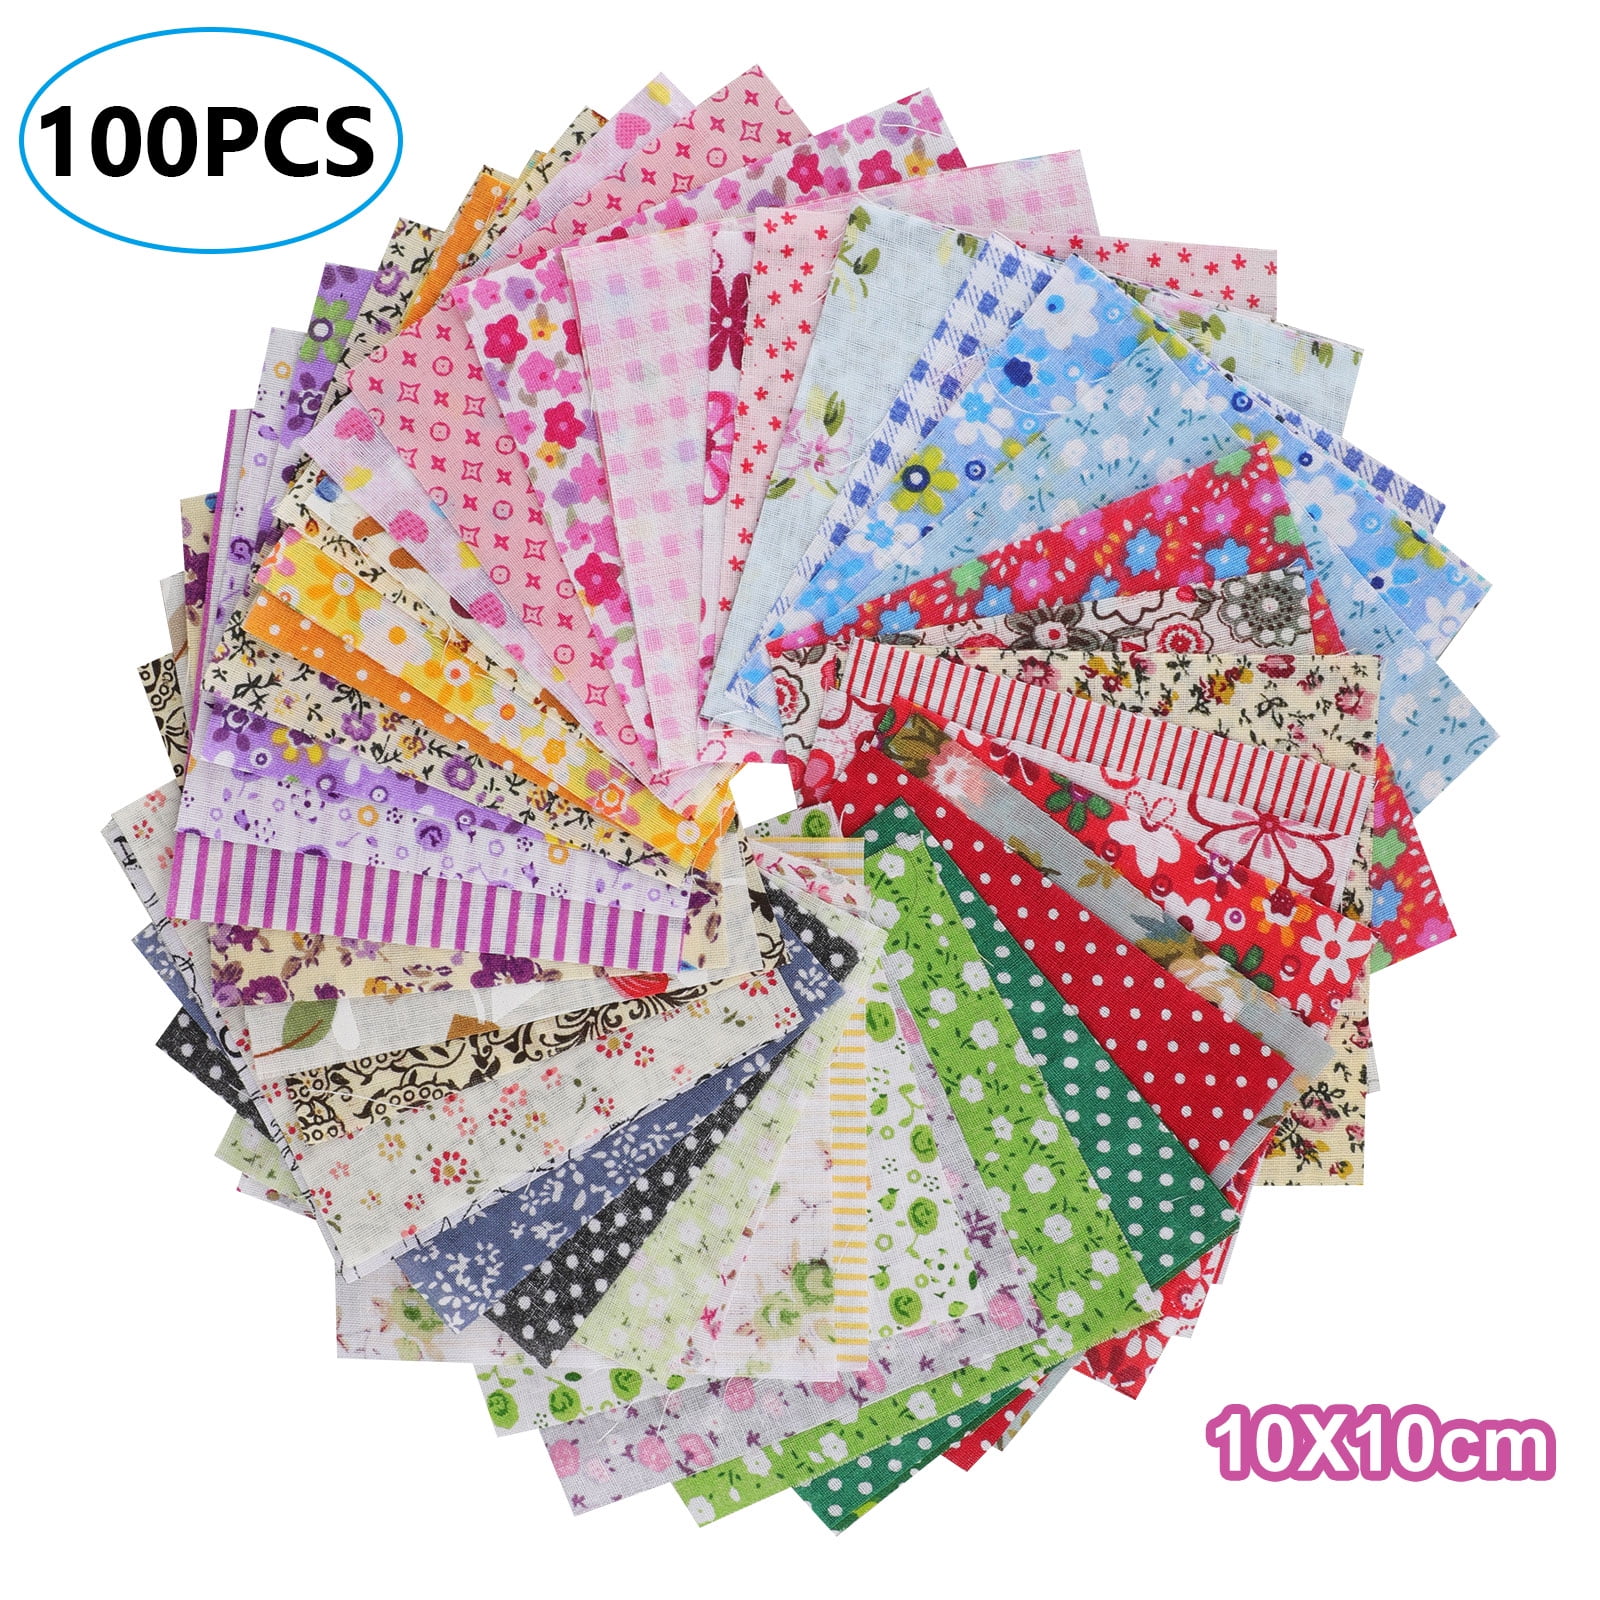 flic-flac Quilting Fabric Squares 100% Cotton Precut Quilt Sewing Floral Fabrics for Craft DIY 10 x 10 inches, 60pcs